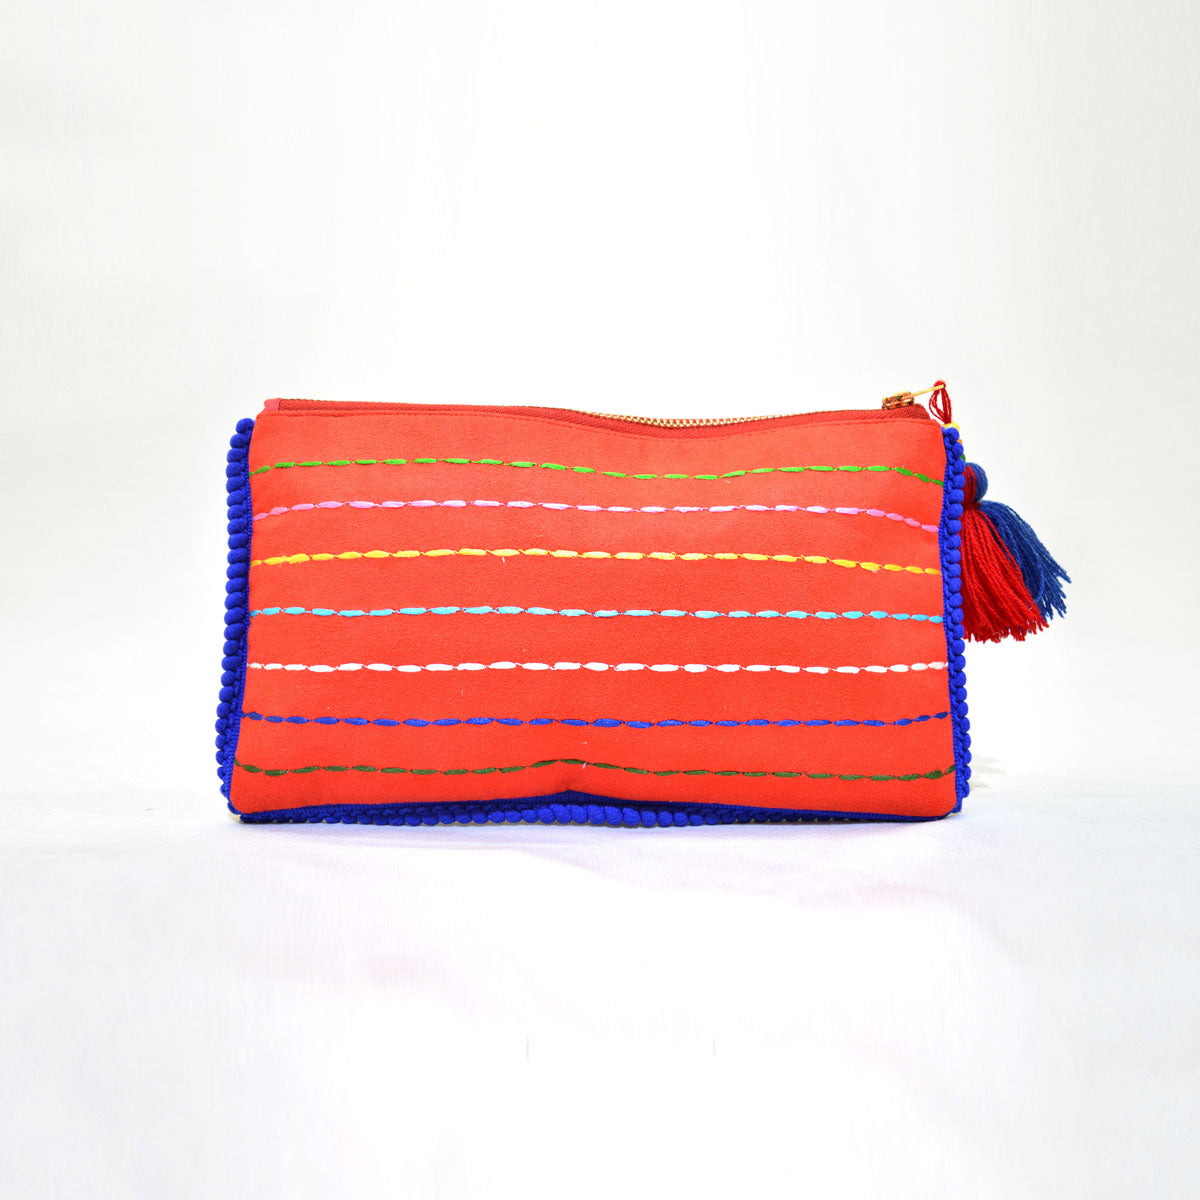 Truck art - Red and blue embroidered pouch, 5X9 inches